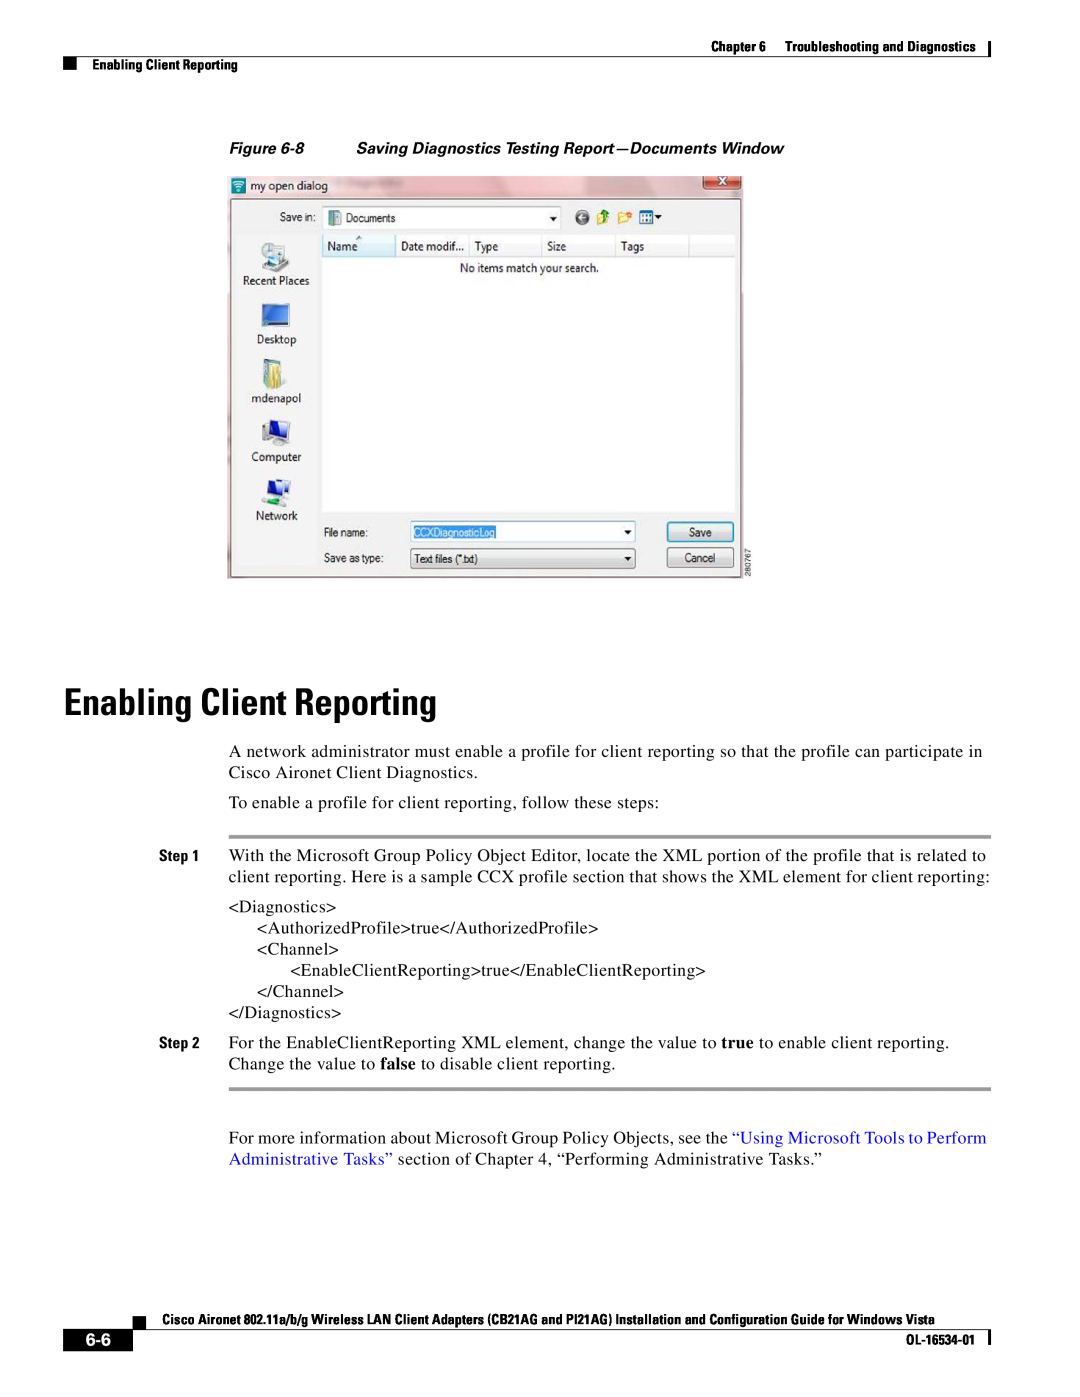 Cisco Systems PI21AG, CB21AG manual Enabling Client Reporting 